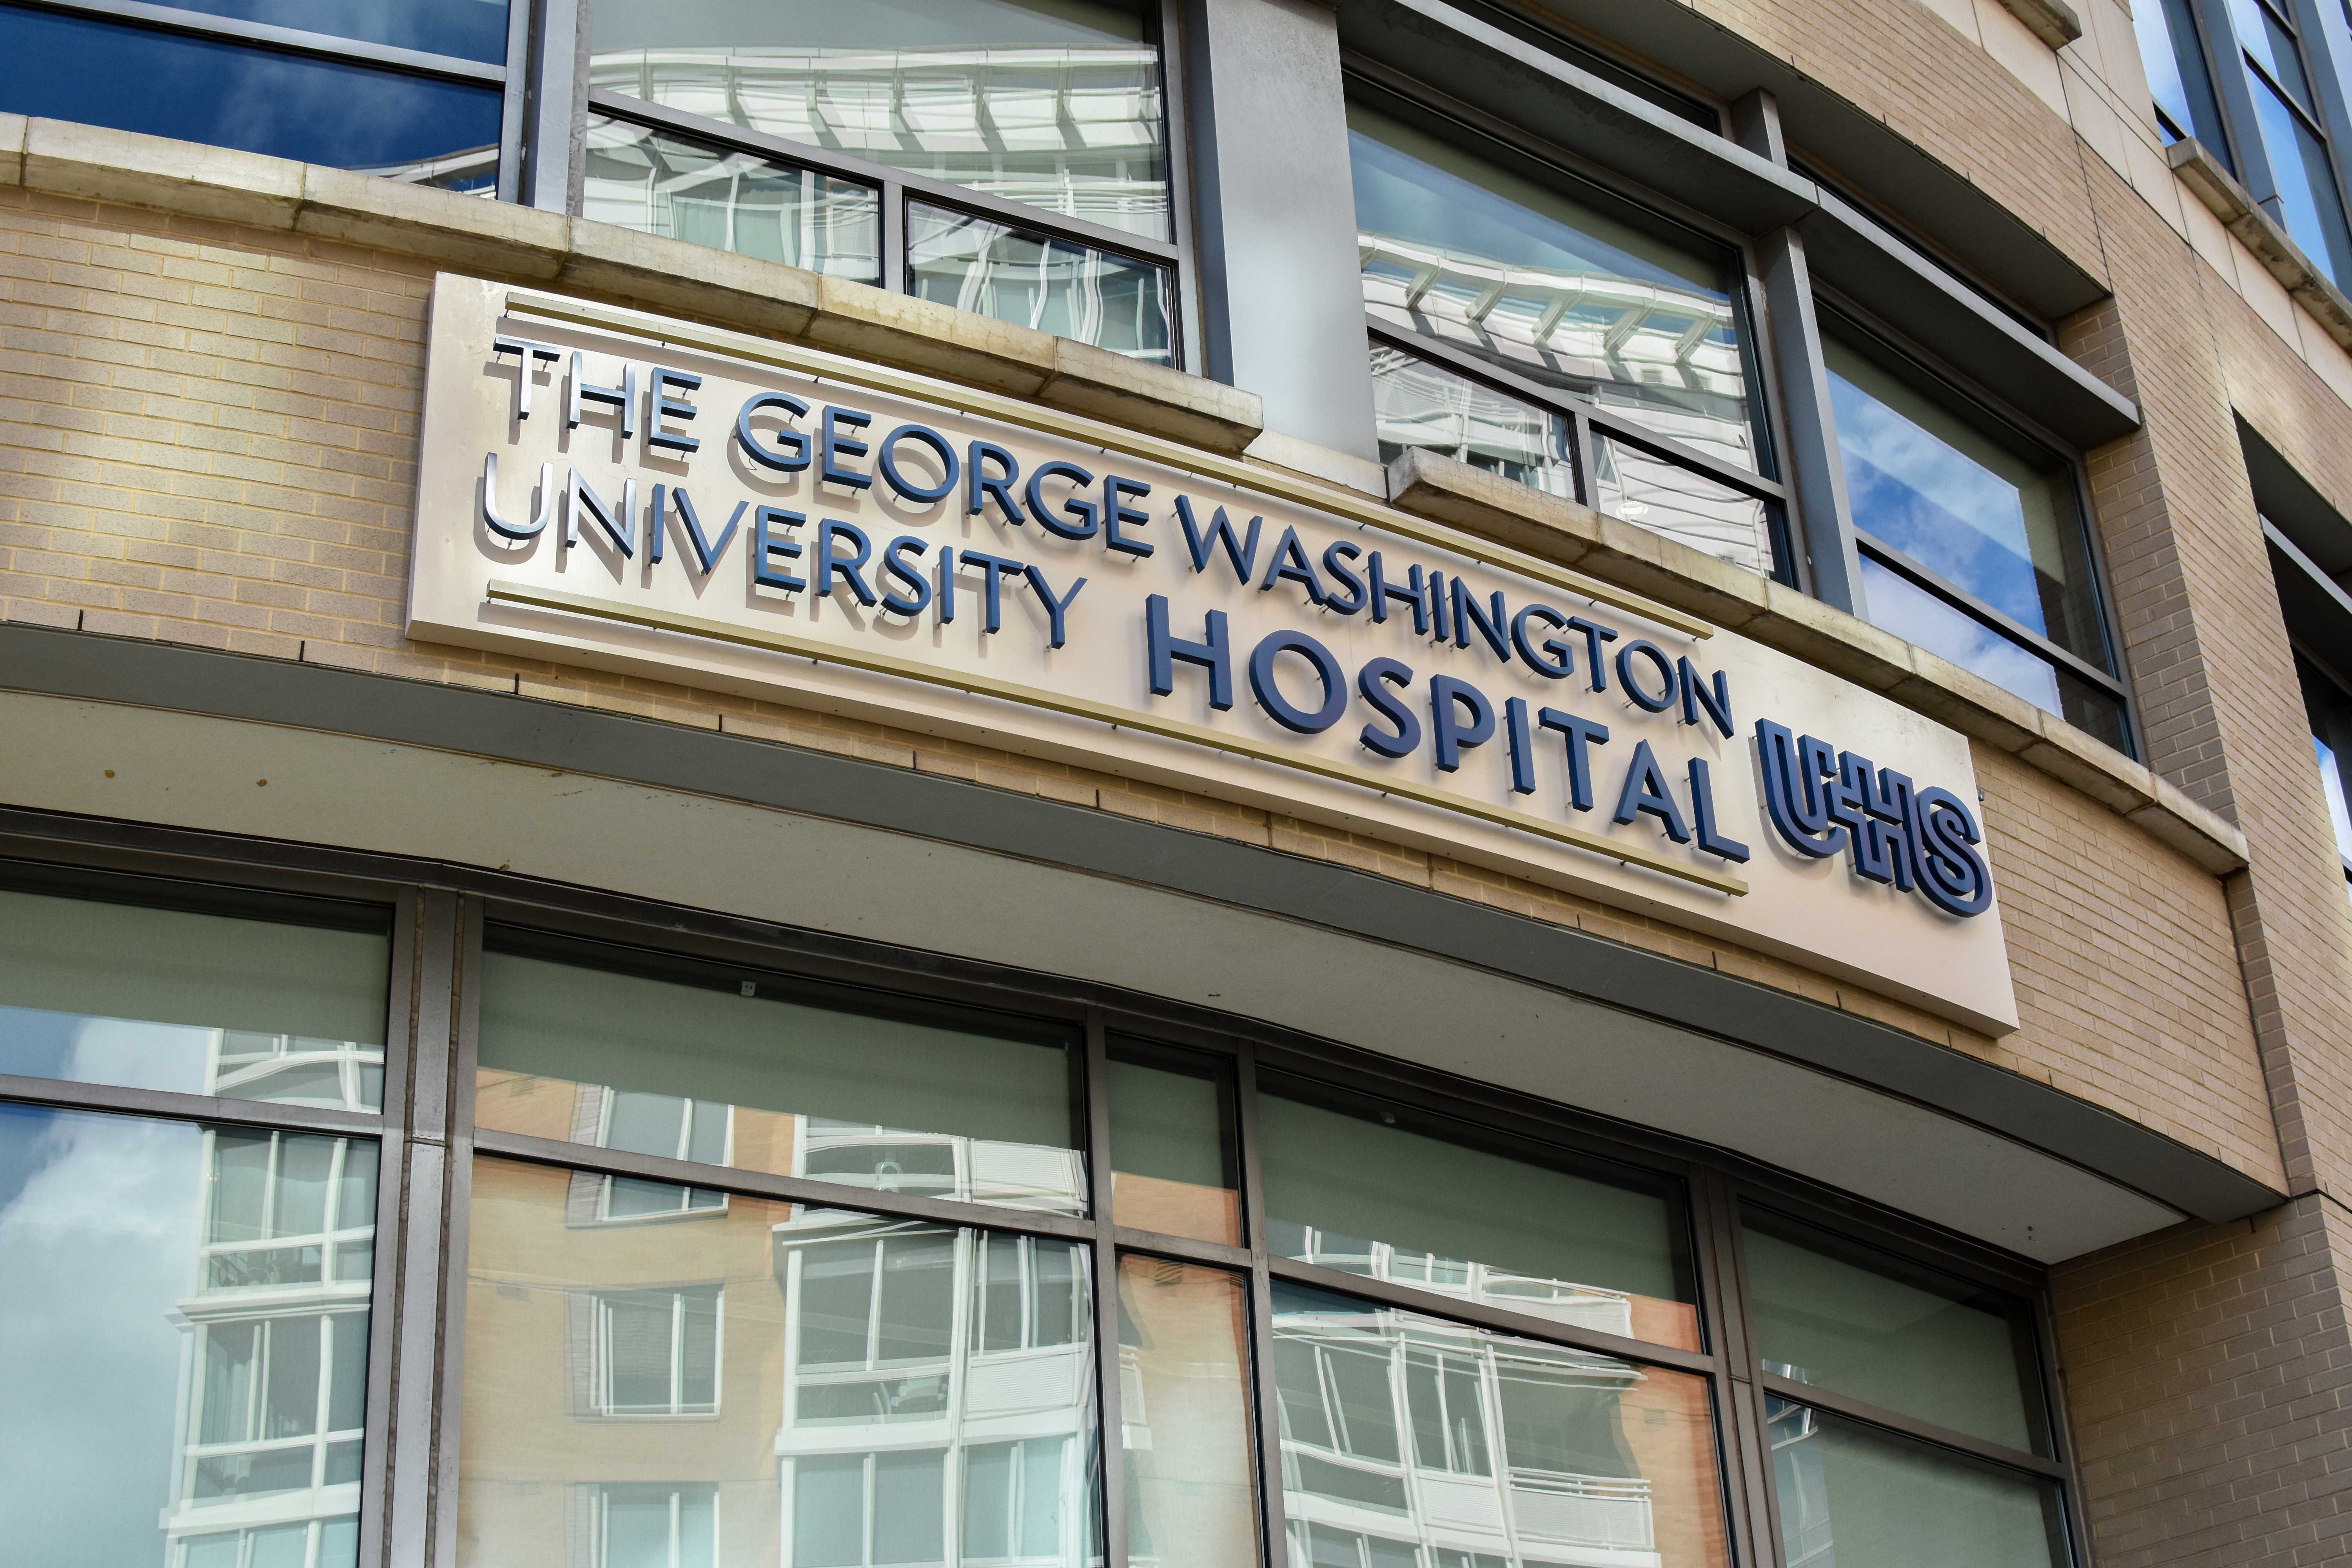 Person arrested for assaulting police officer at George Washington Hospital